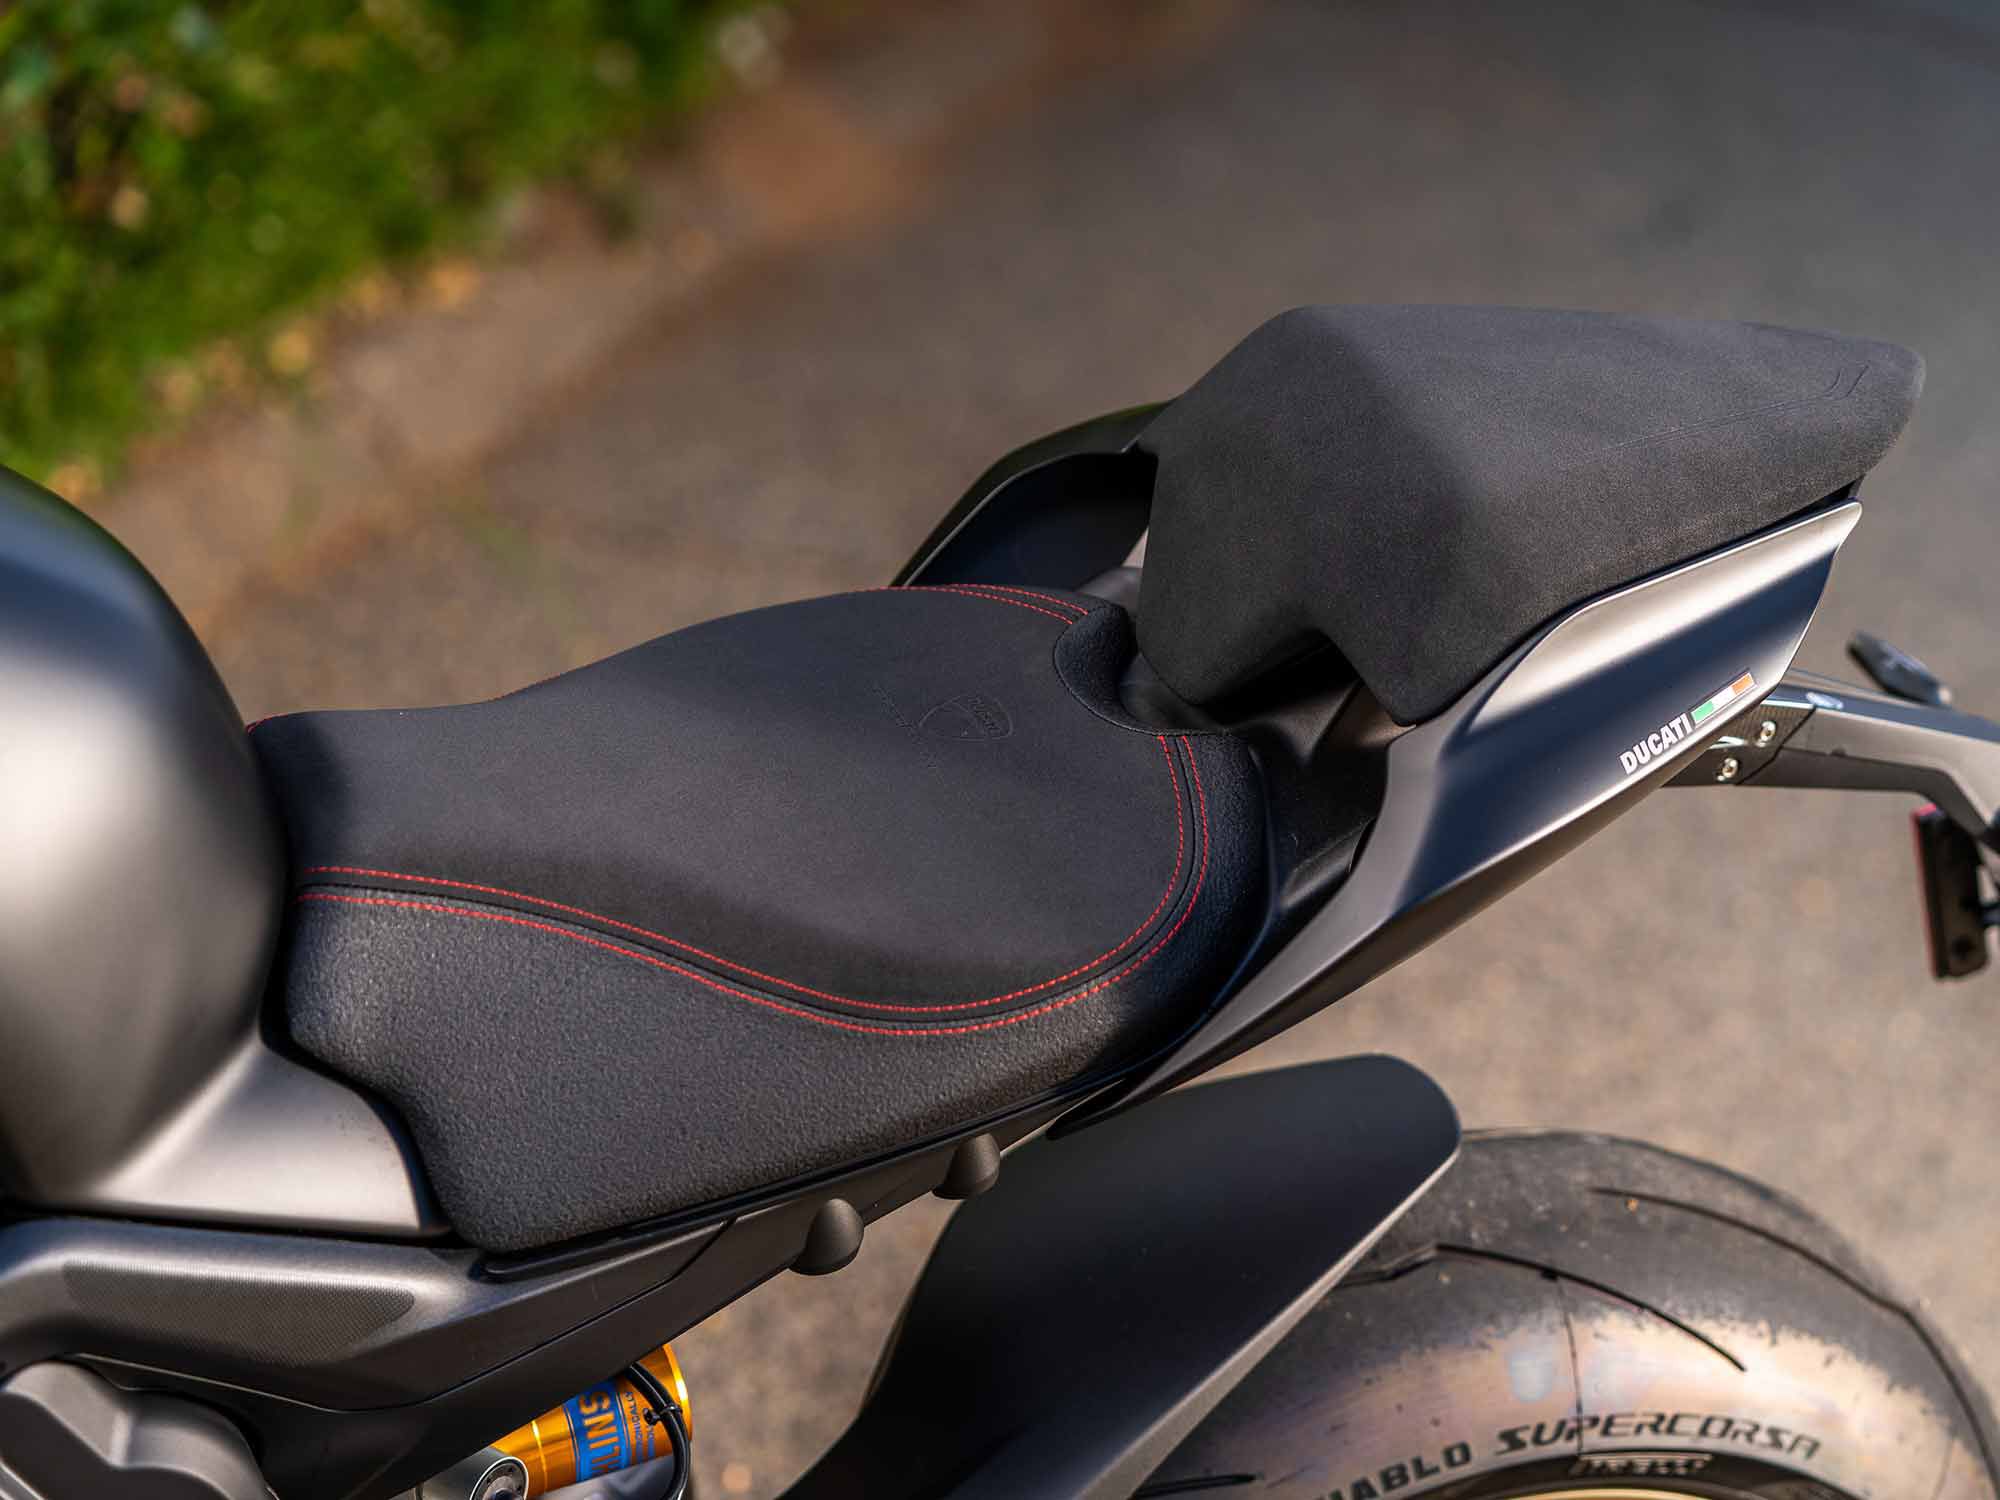 The accessory racing seat offers a surprisingly level of comfort. However, it’s a tad too grippy for our taste. Short riders beware, however. It raises the seat height to just over 34 in.